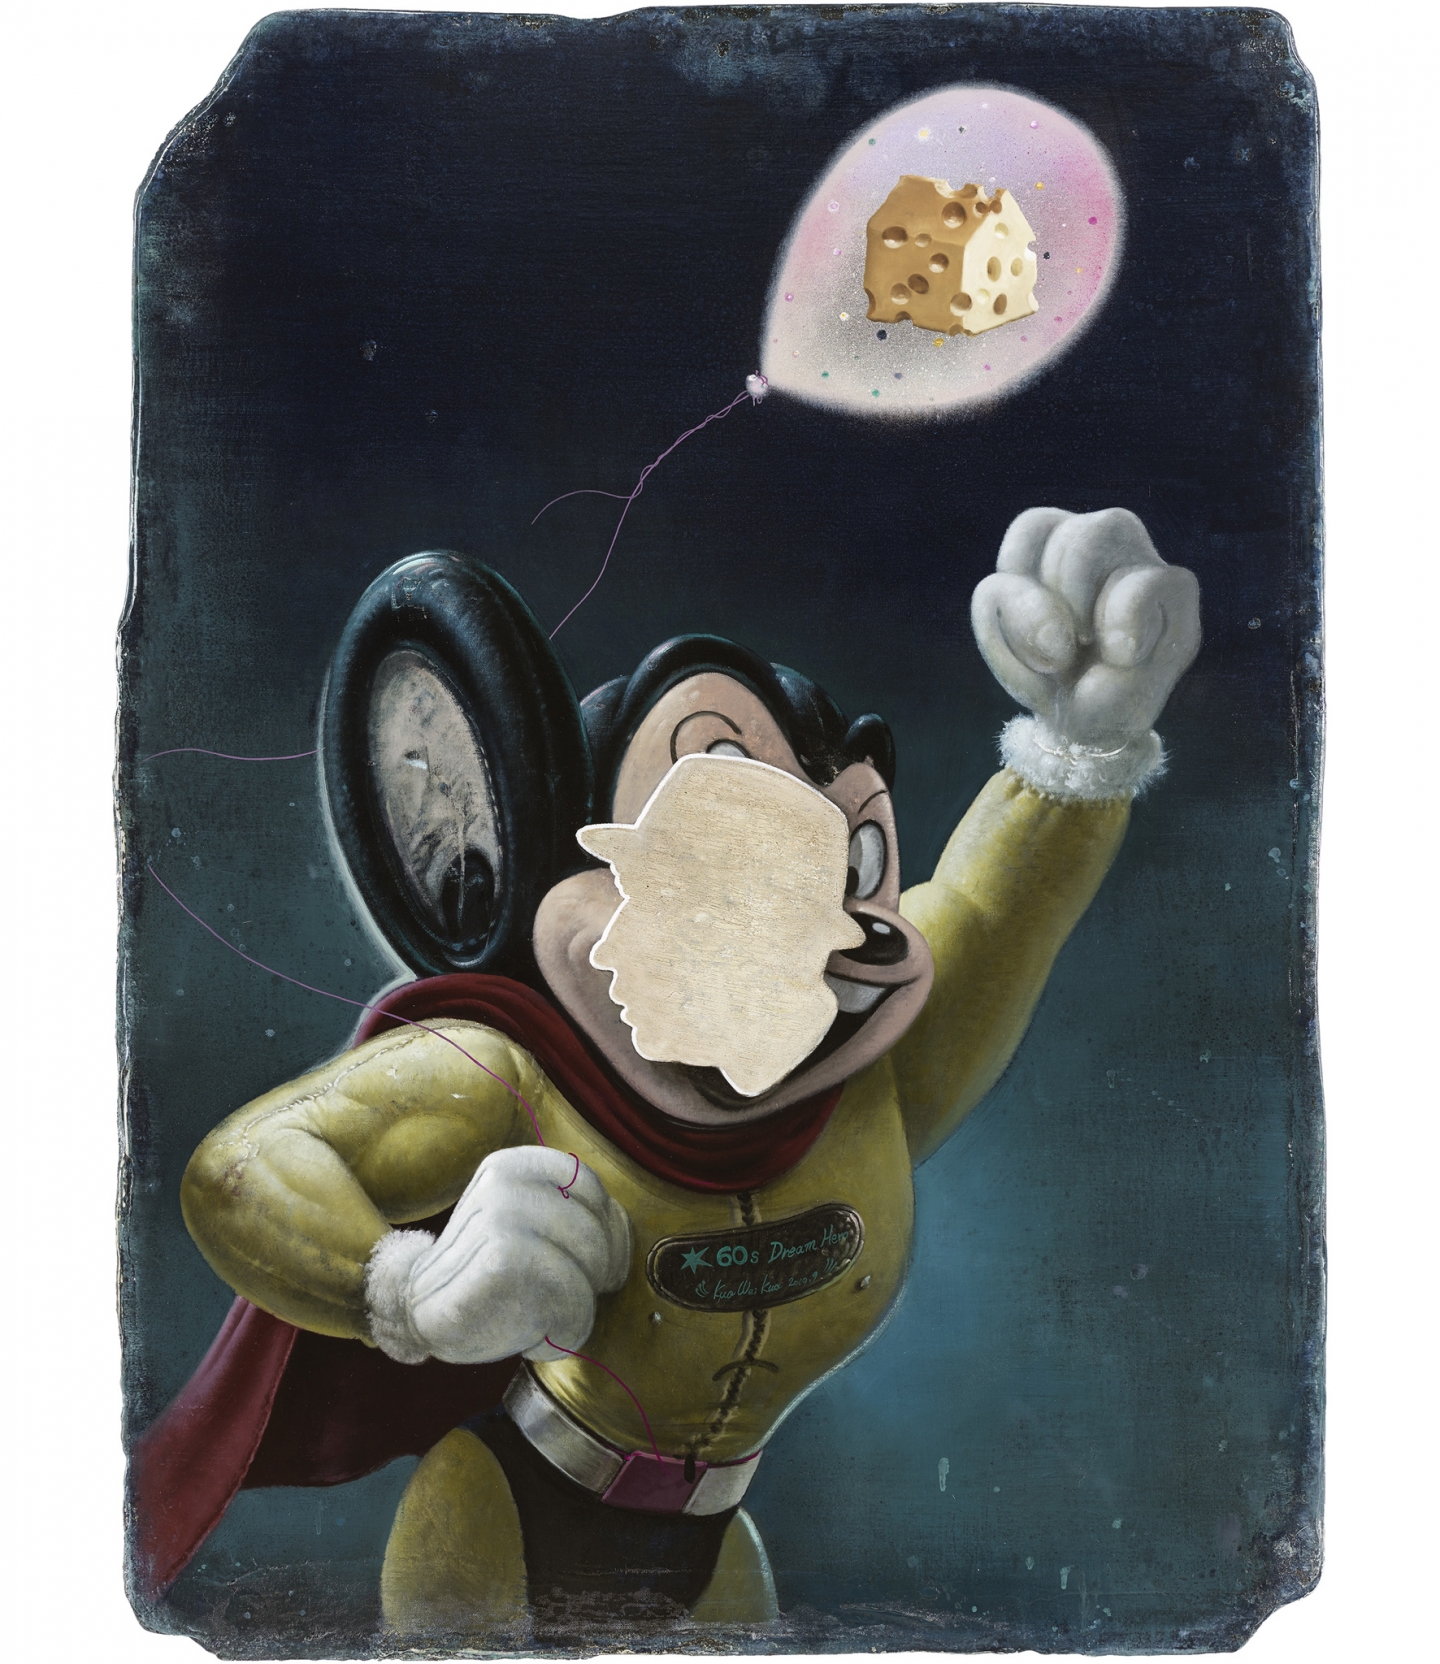 Mighty Mouse's Maasdam Cheese